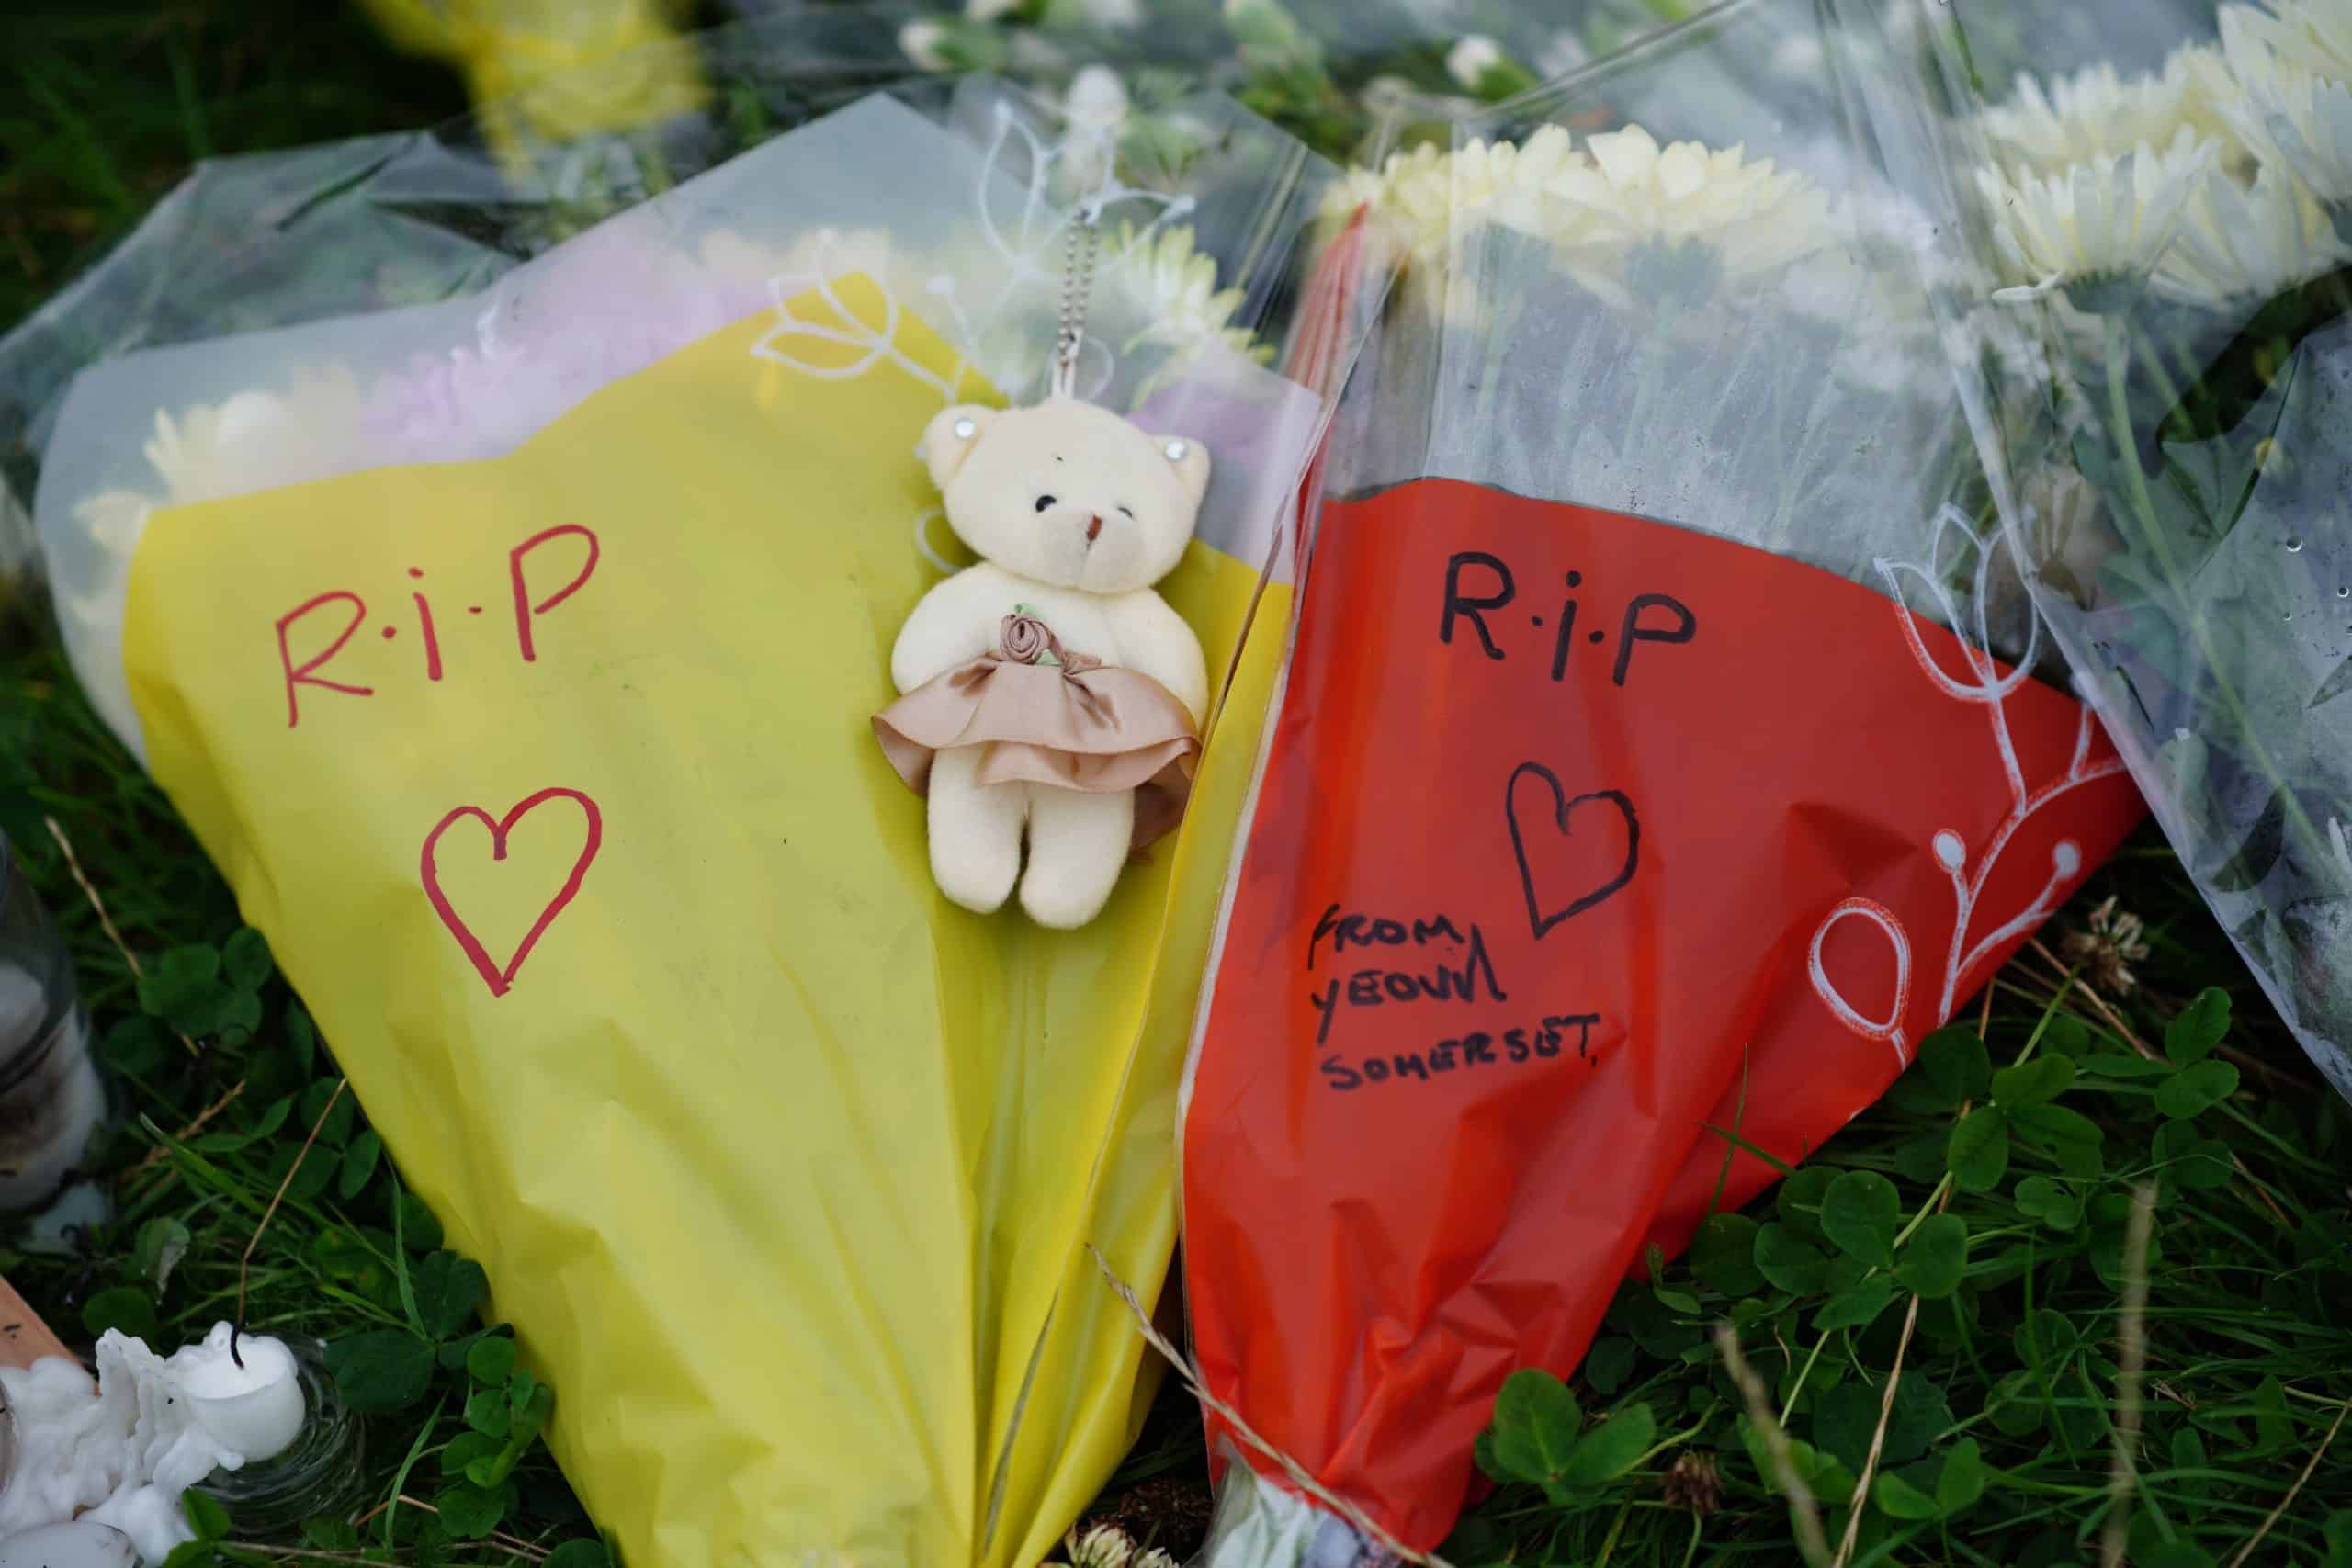 ‘The world is darker without you’: Tributes paid to Plymouth victims